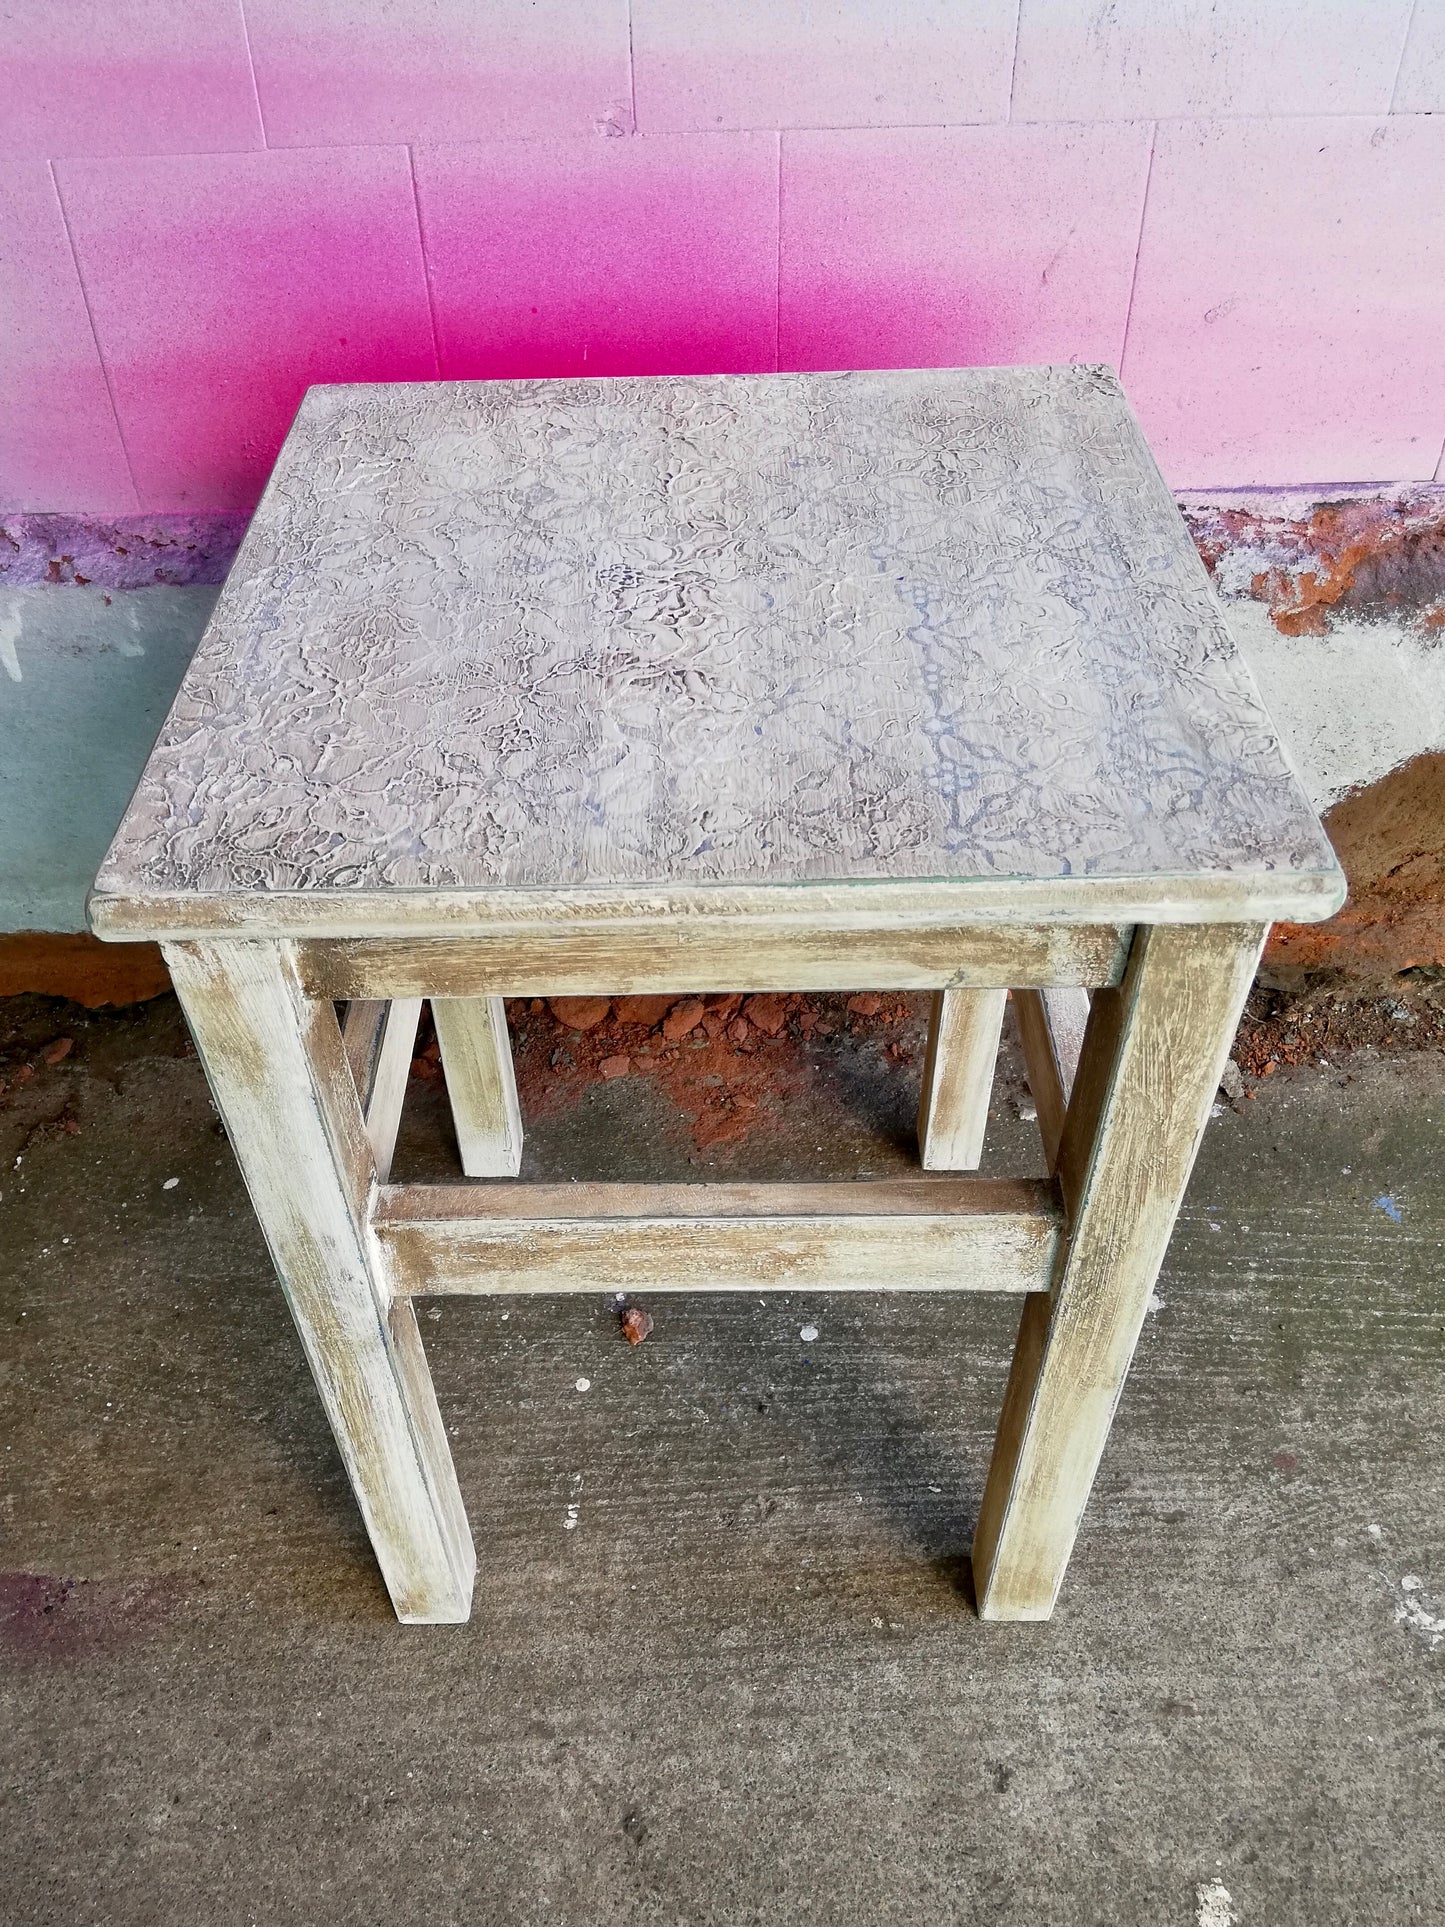 Painted and embossed side table / stool